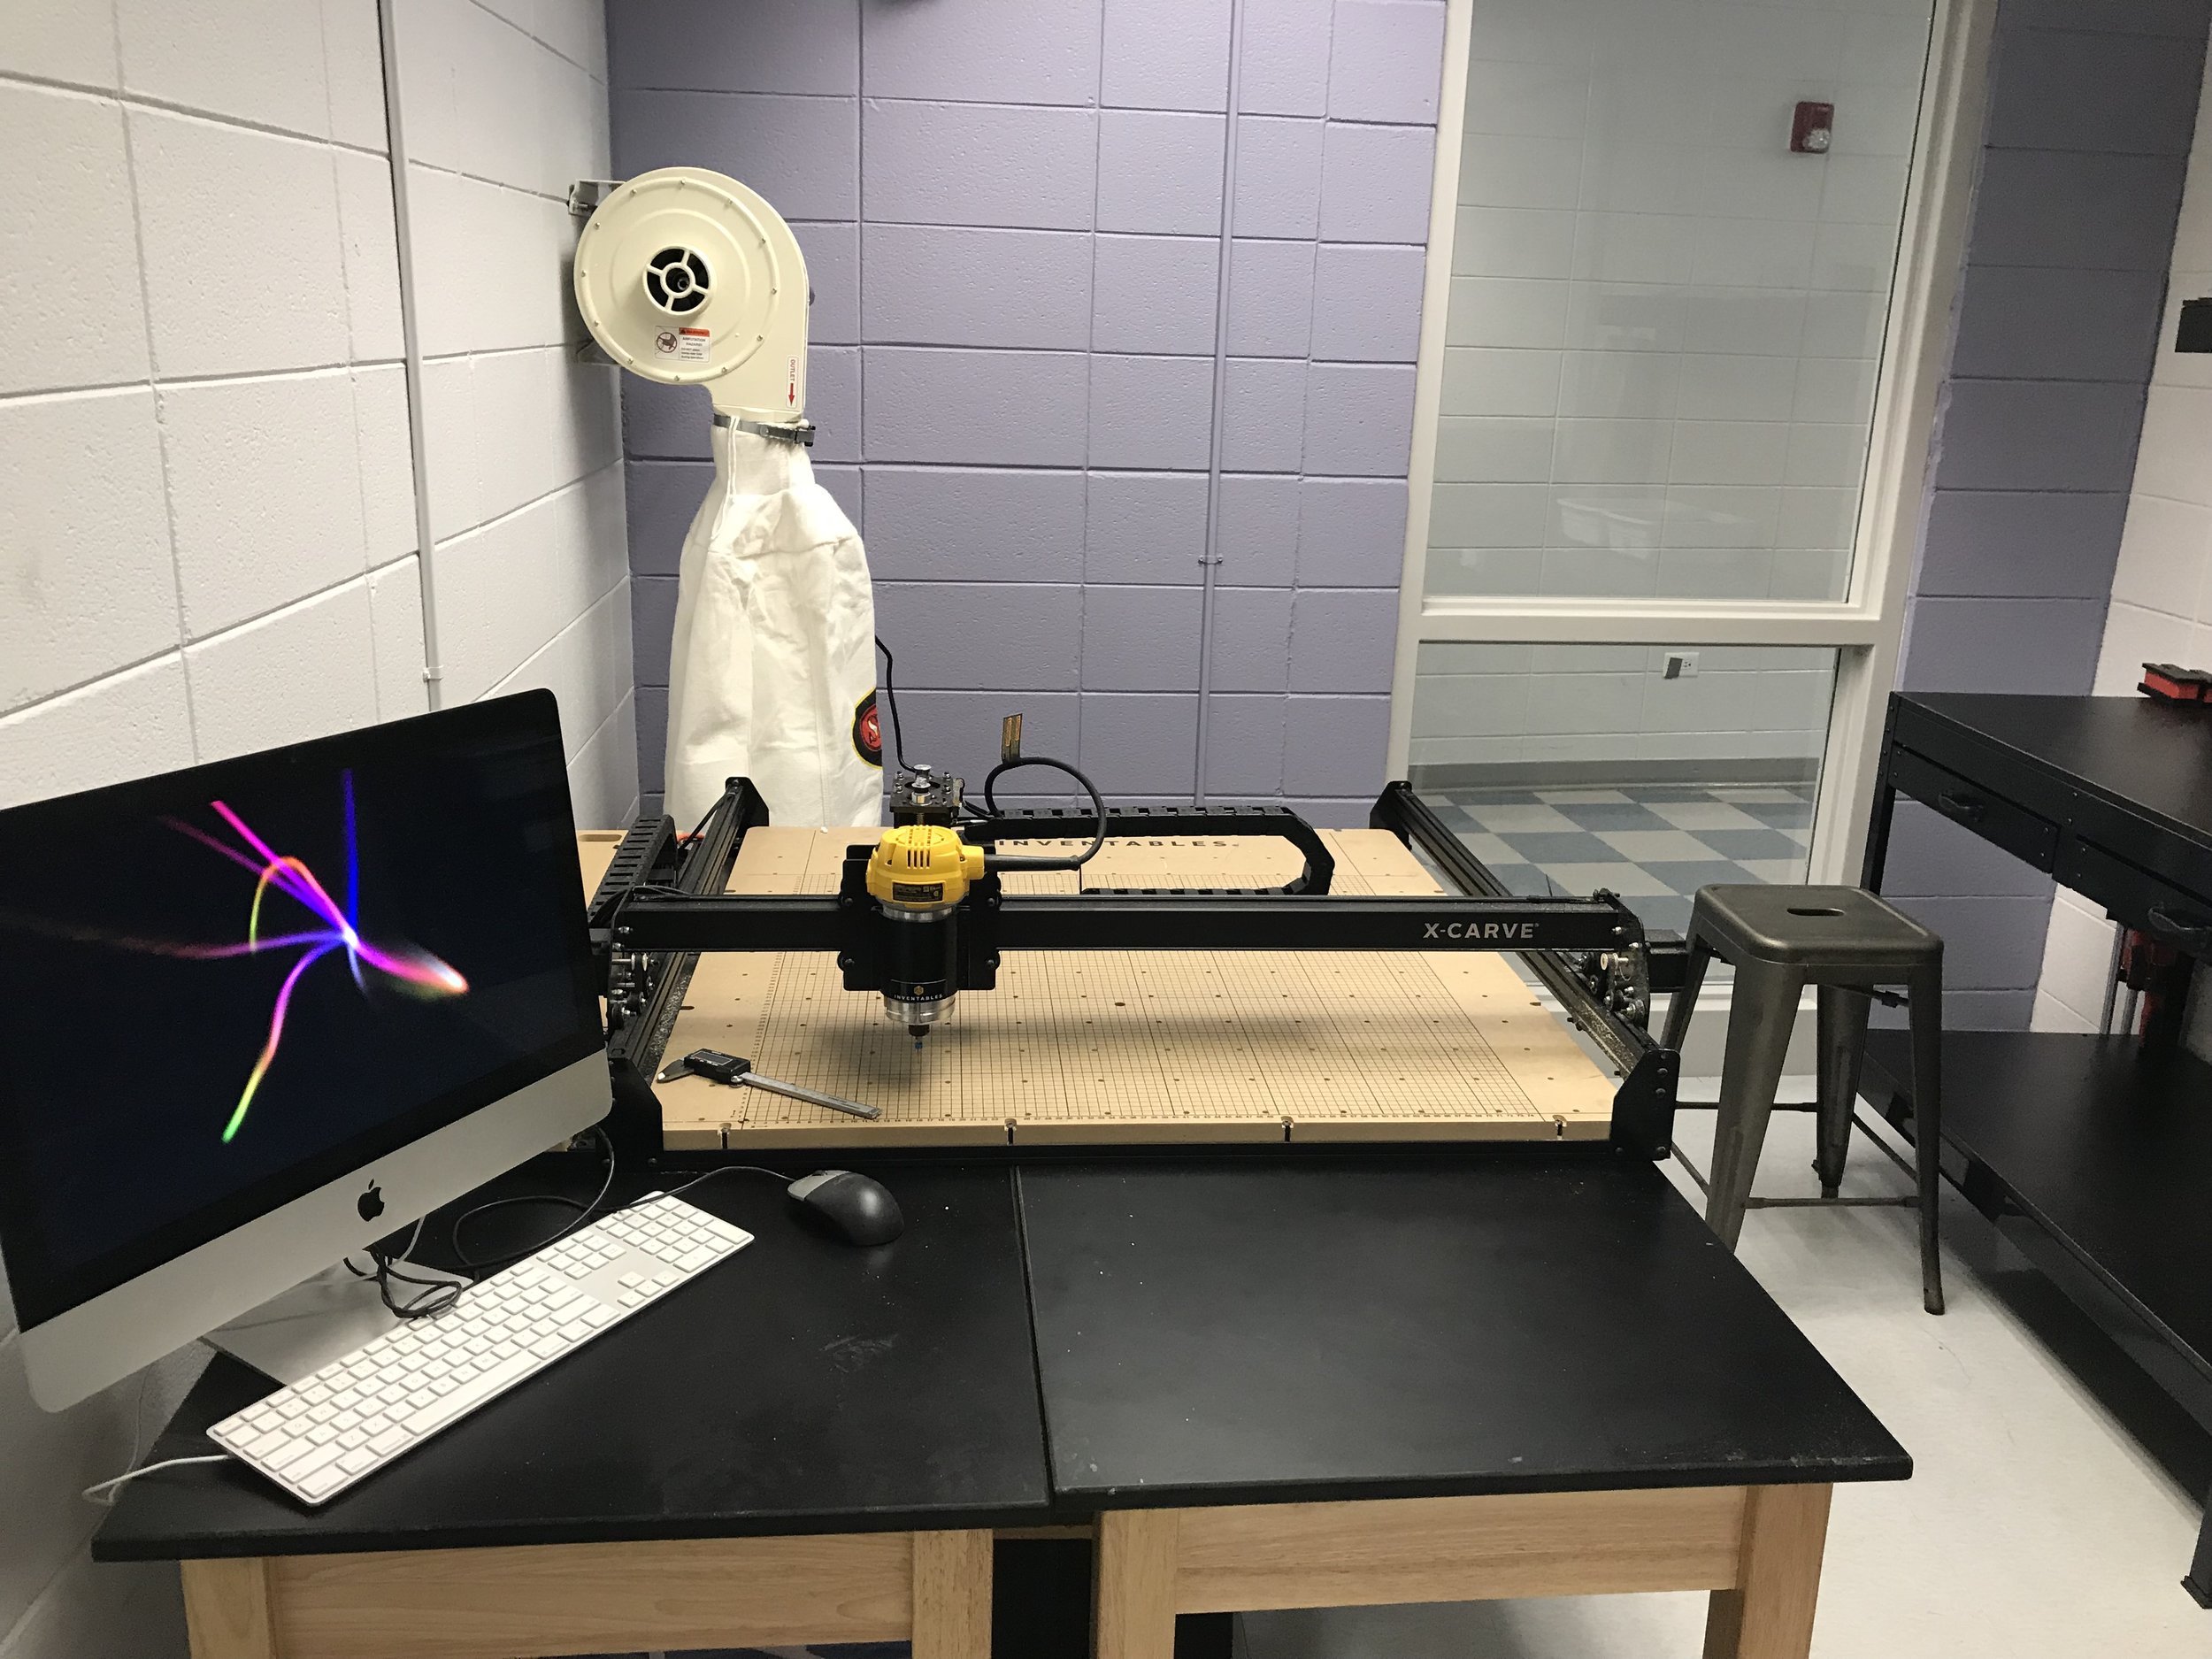 X-carve, and woodworking room